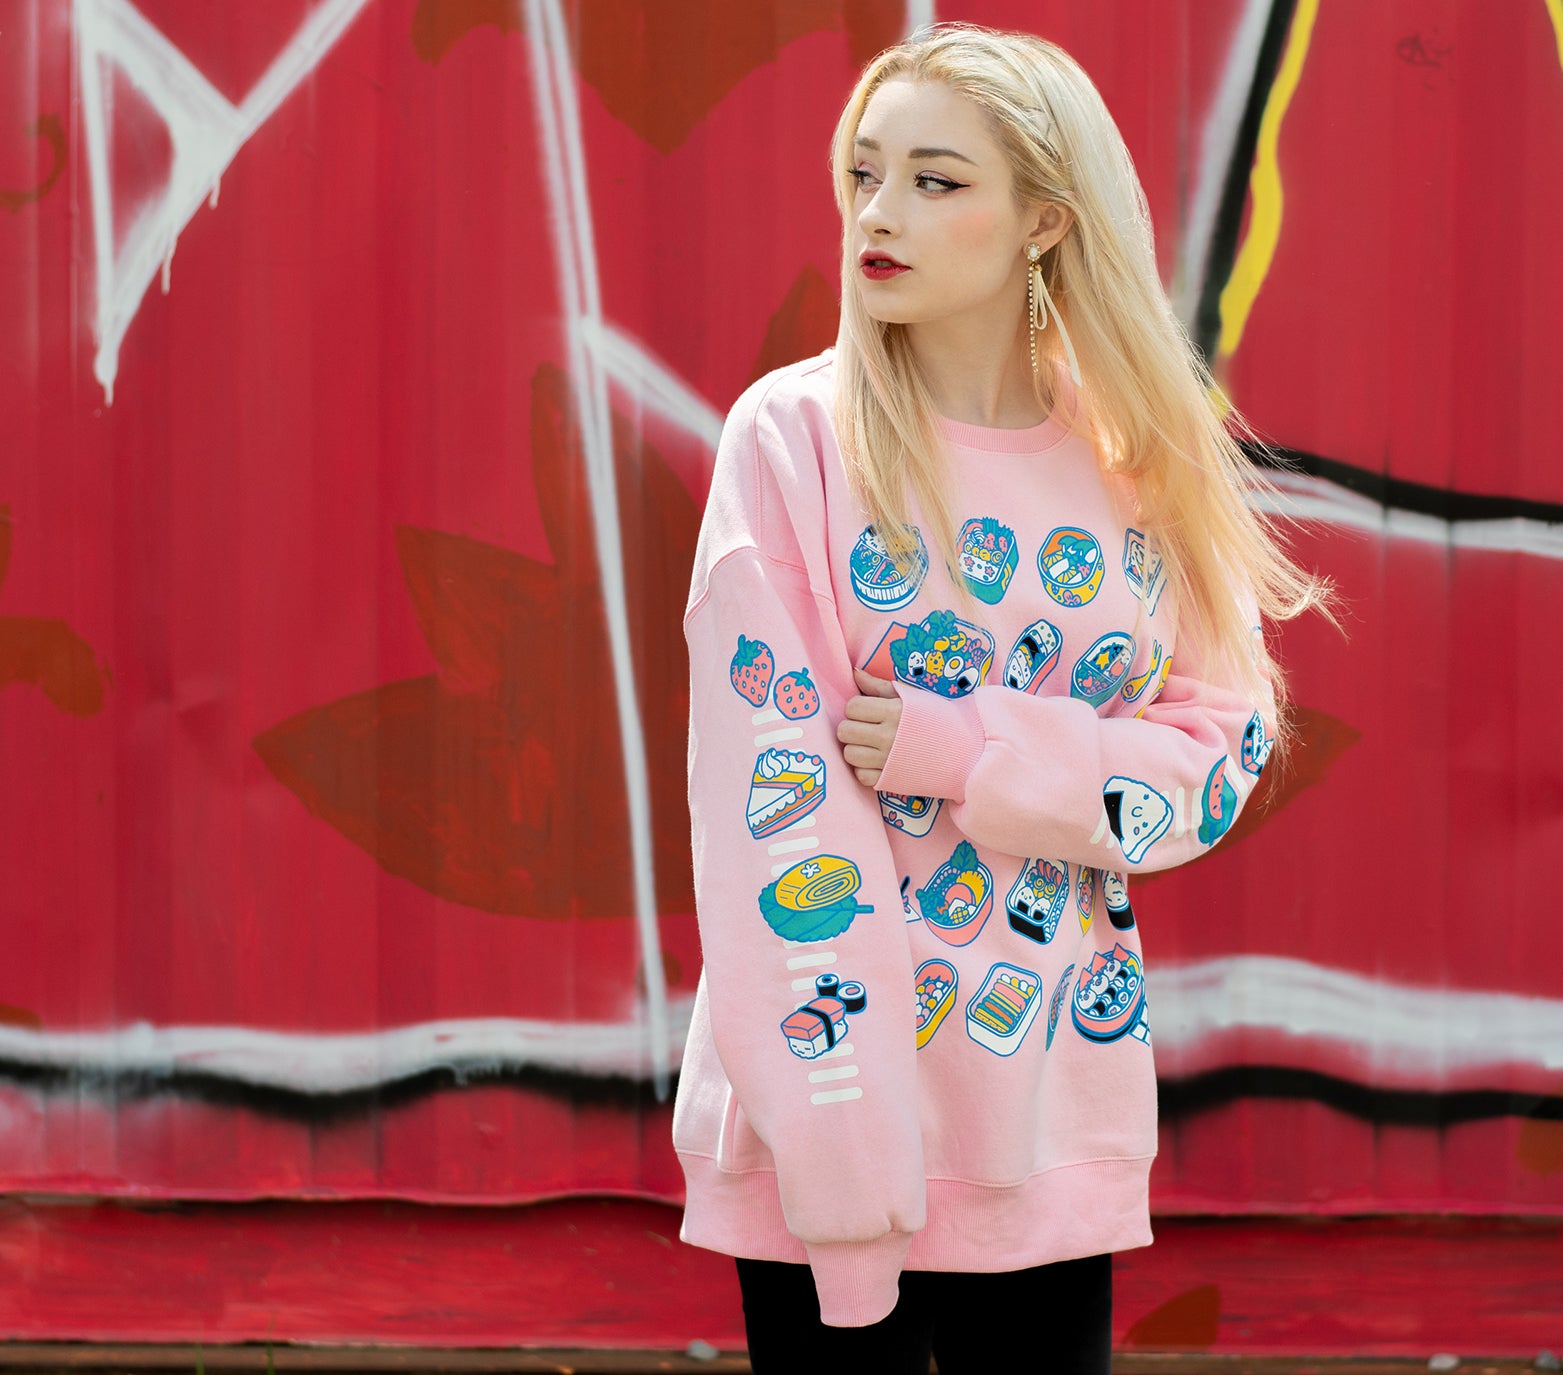 Light pink bento box sweatshirt in an ultra soft exterior jersey fabric with a warm fuzzy interior. Model is displaying right sleeves while looking right.